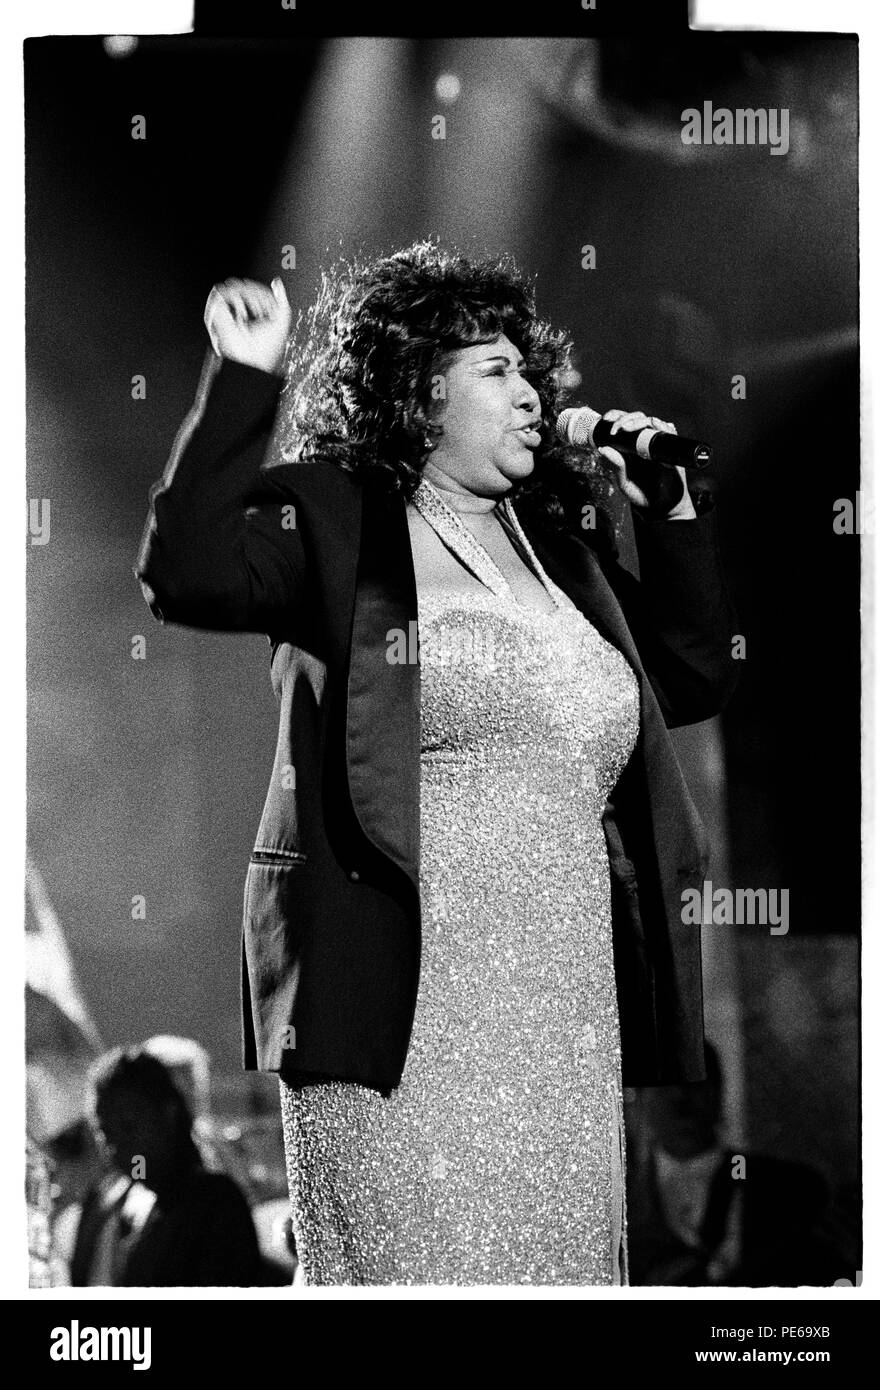 ***FILE PHOTO*** R&B LEGEND ARETHA REPORTEDLY GRAVELY ILL AND SURROUNDED BY FAMILY IN DETROIT HOSPITAL Aretha Franklin performing in Feb 1995 Jay Blakesberg/MediaPunch Stock Photo